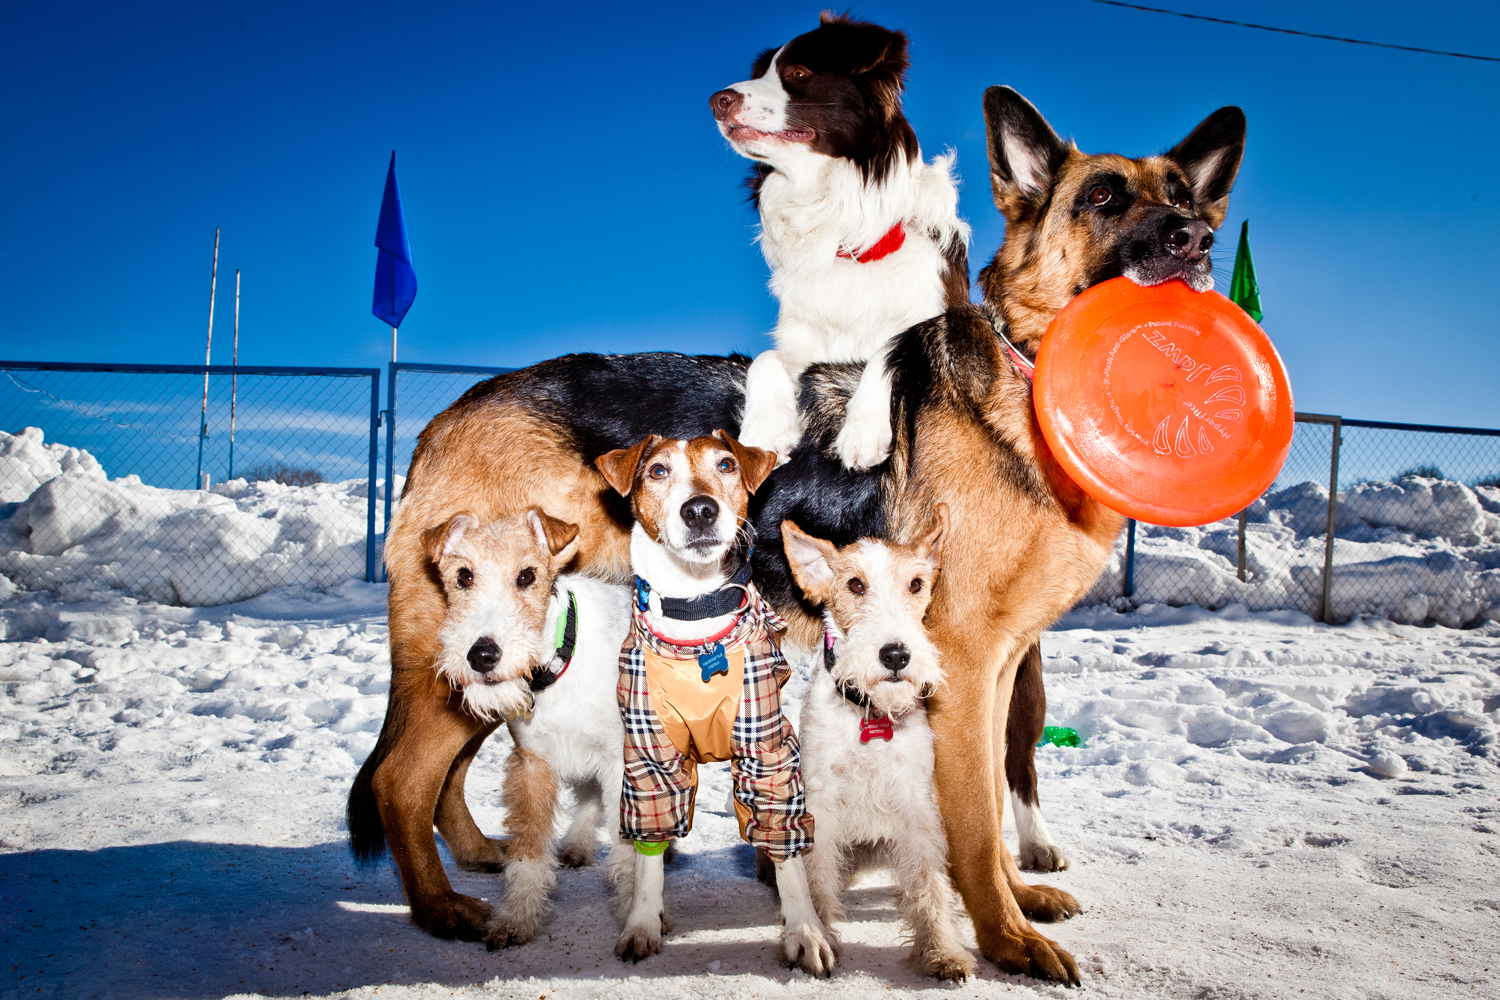 Frisbee dog is open to all canines, regardless of age, breed, and characteristics. Neither is the owner’s physical shape of importance. What matters is the desire to take part.